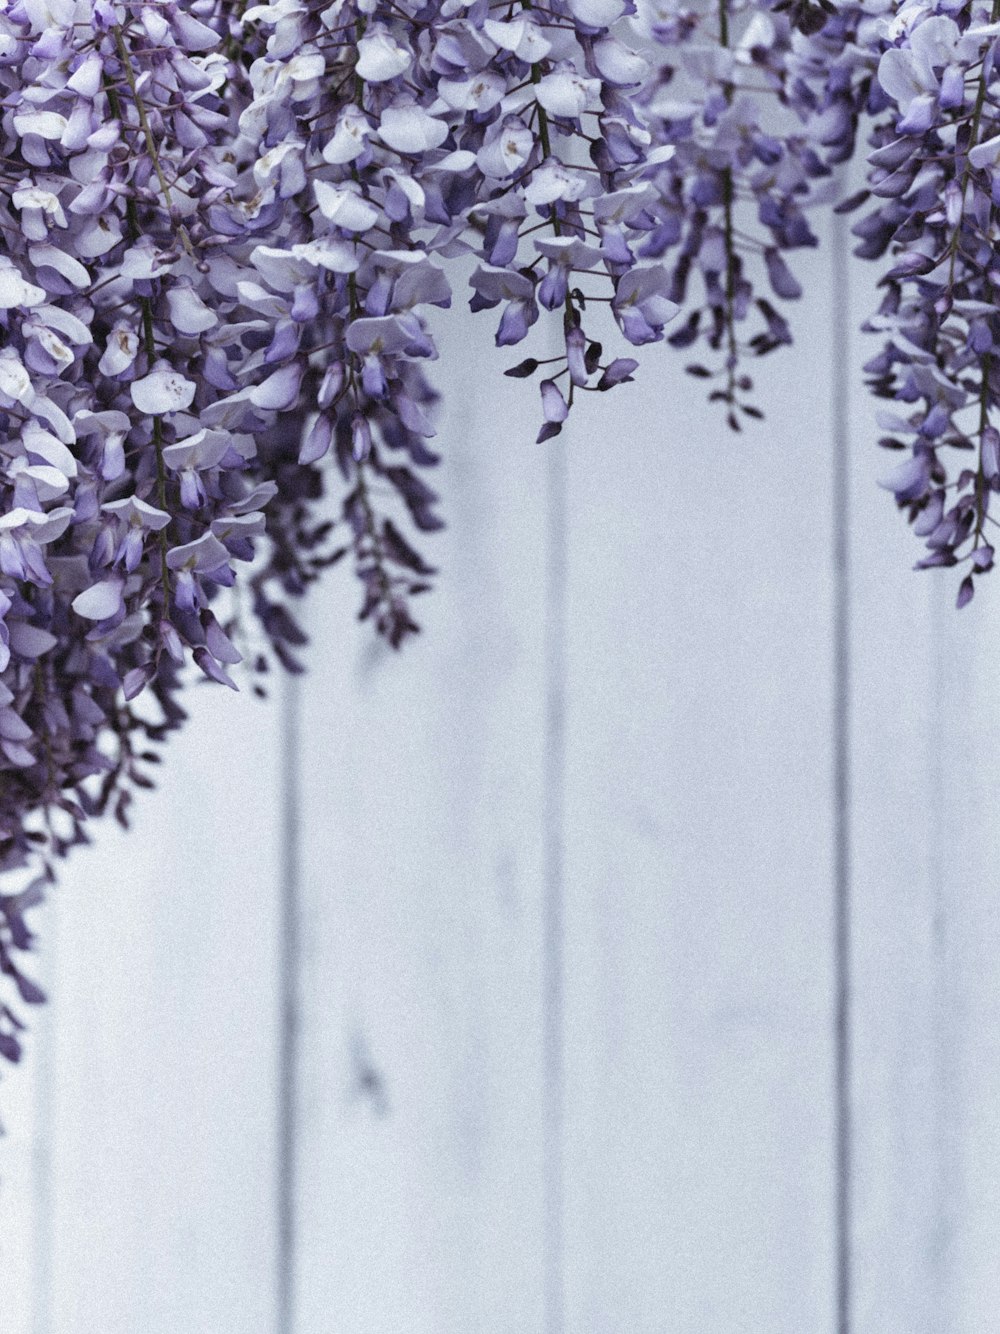 purple and white flowers on gray wooden fence